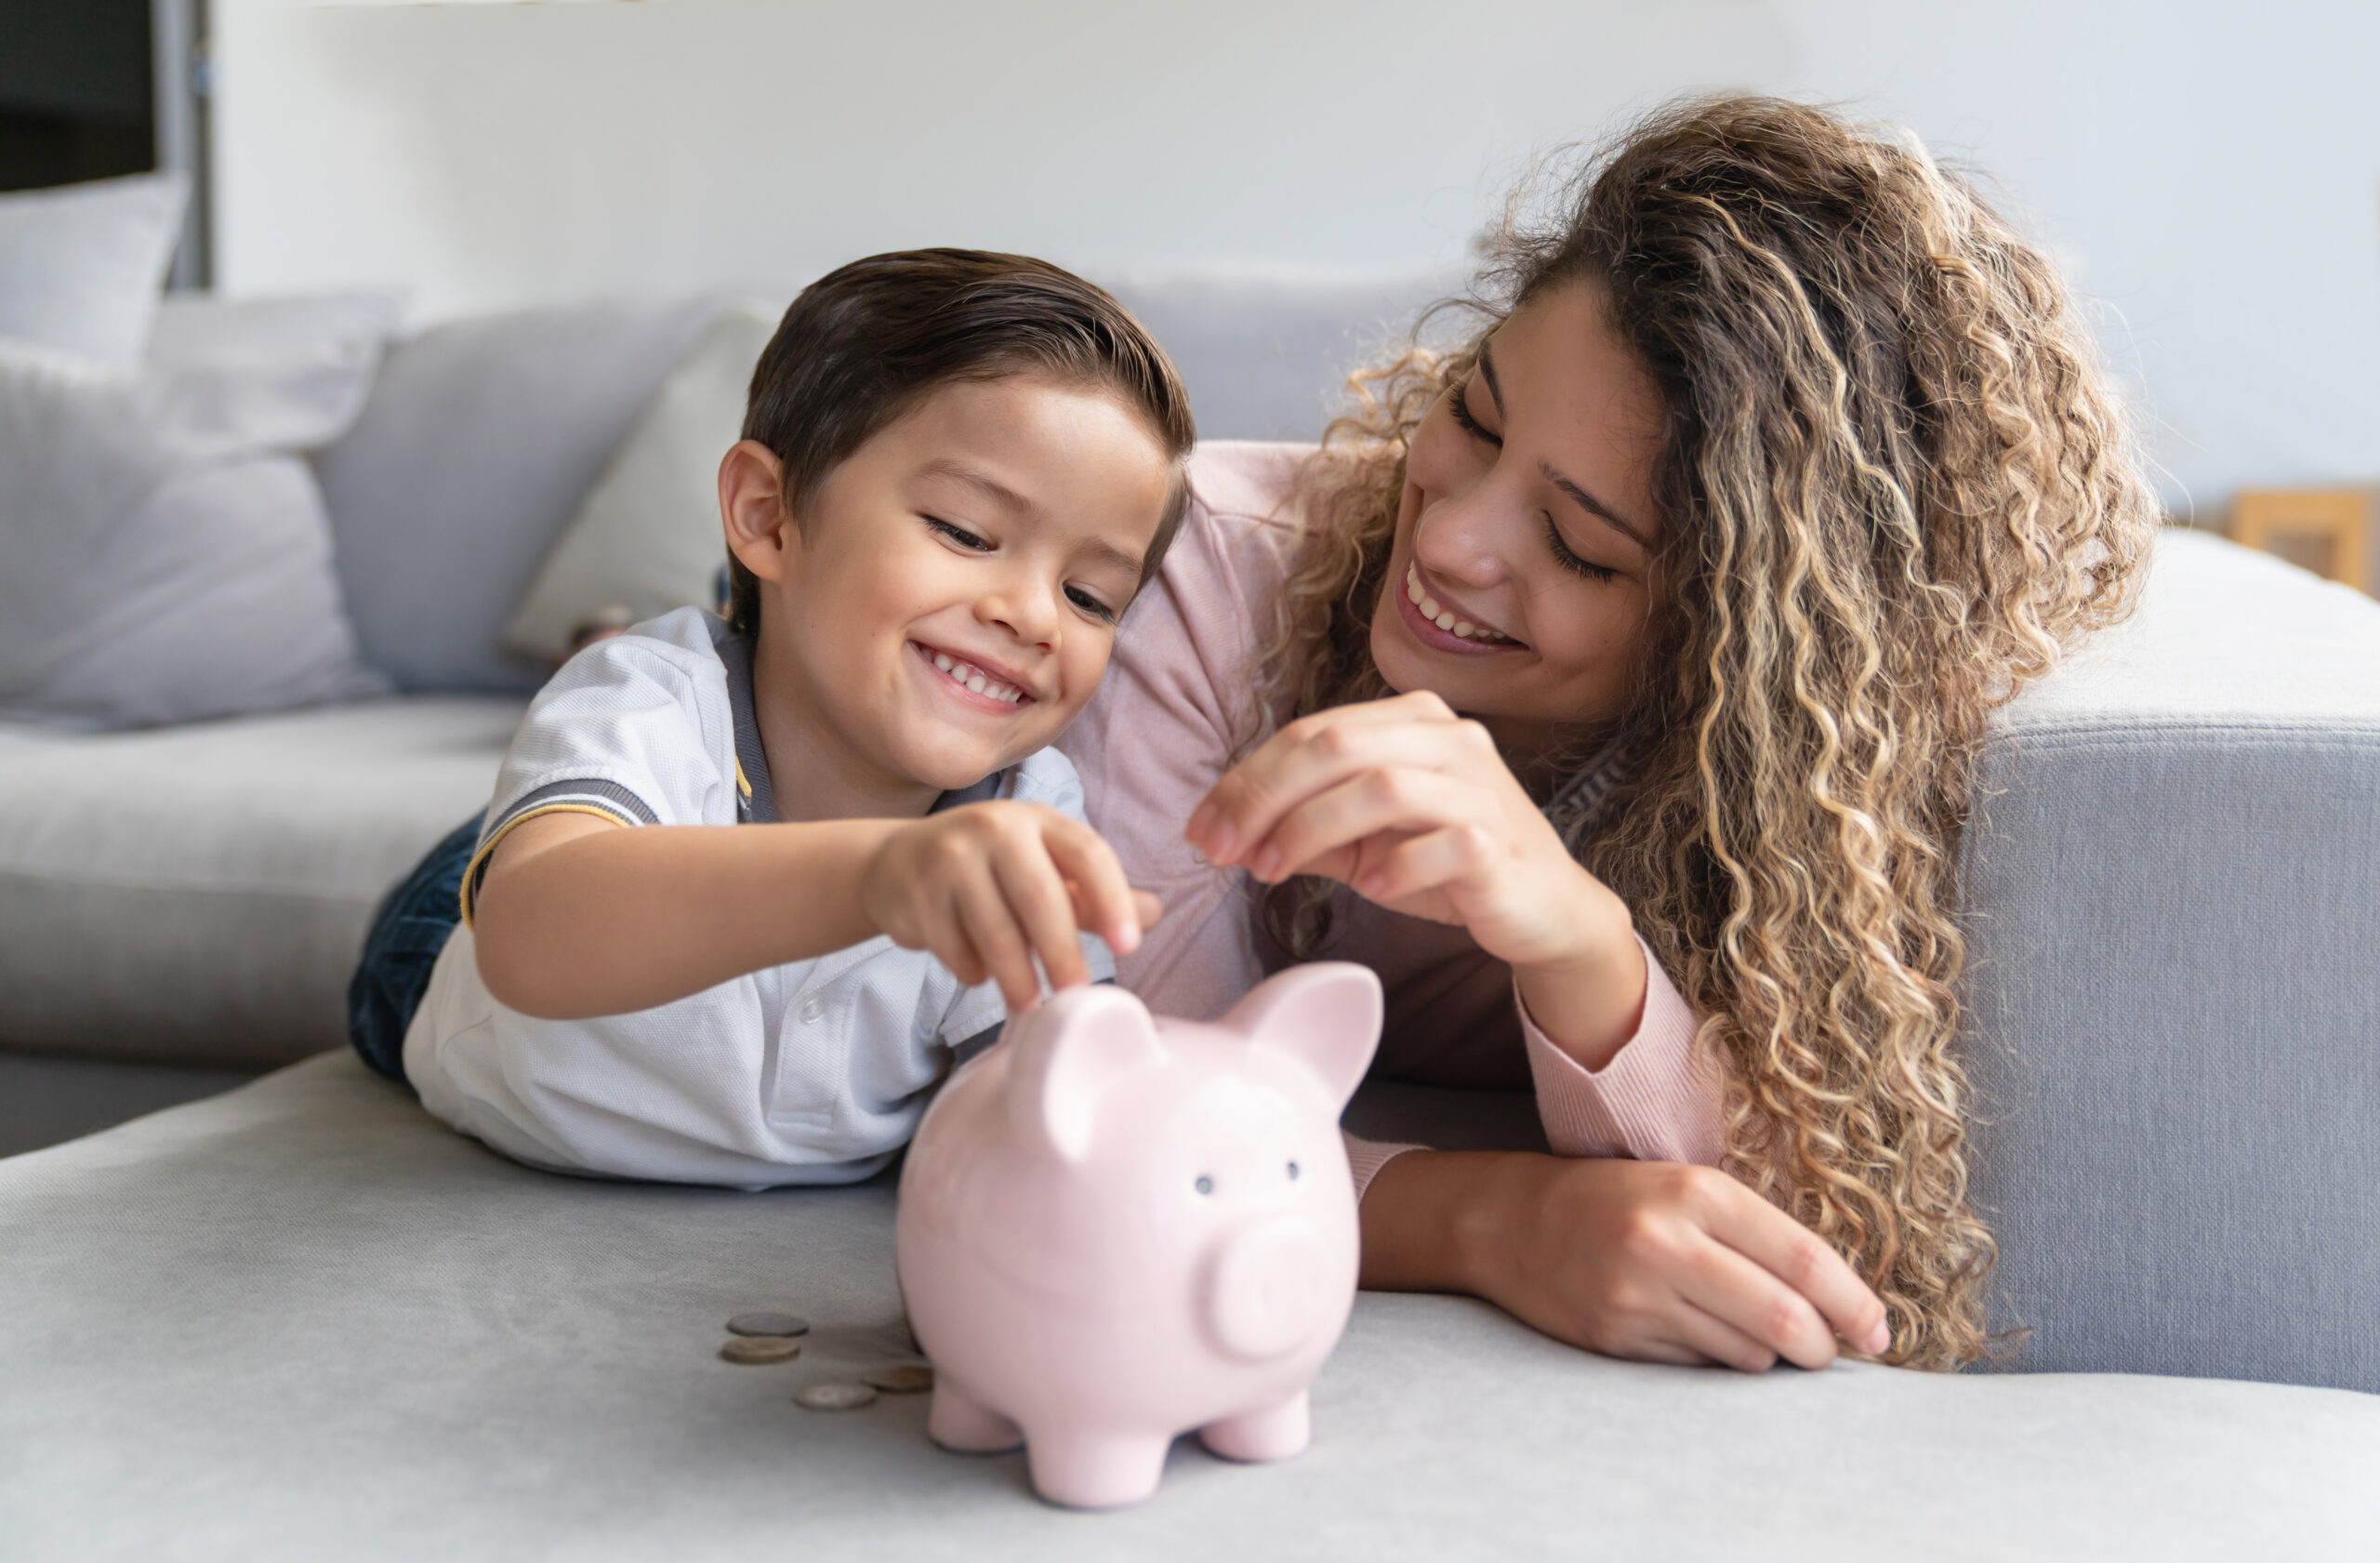 Portrait of a happy mother and son saving money in a piggybank and smiling - home finances concepts